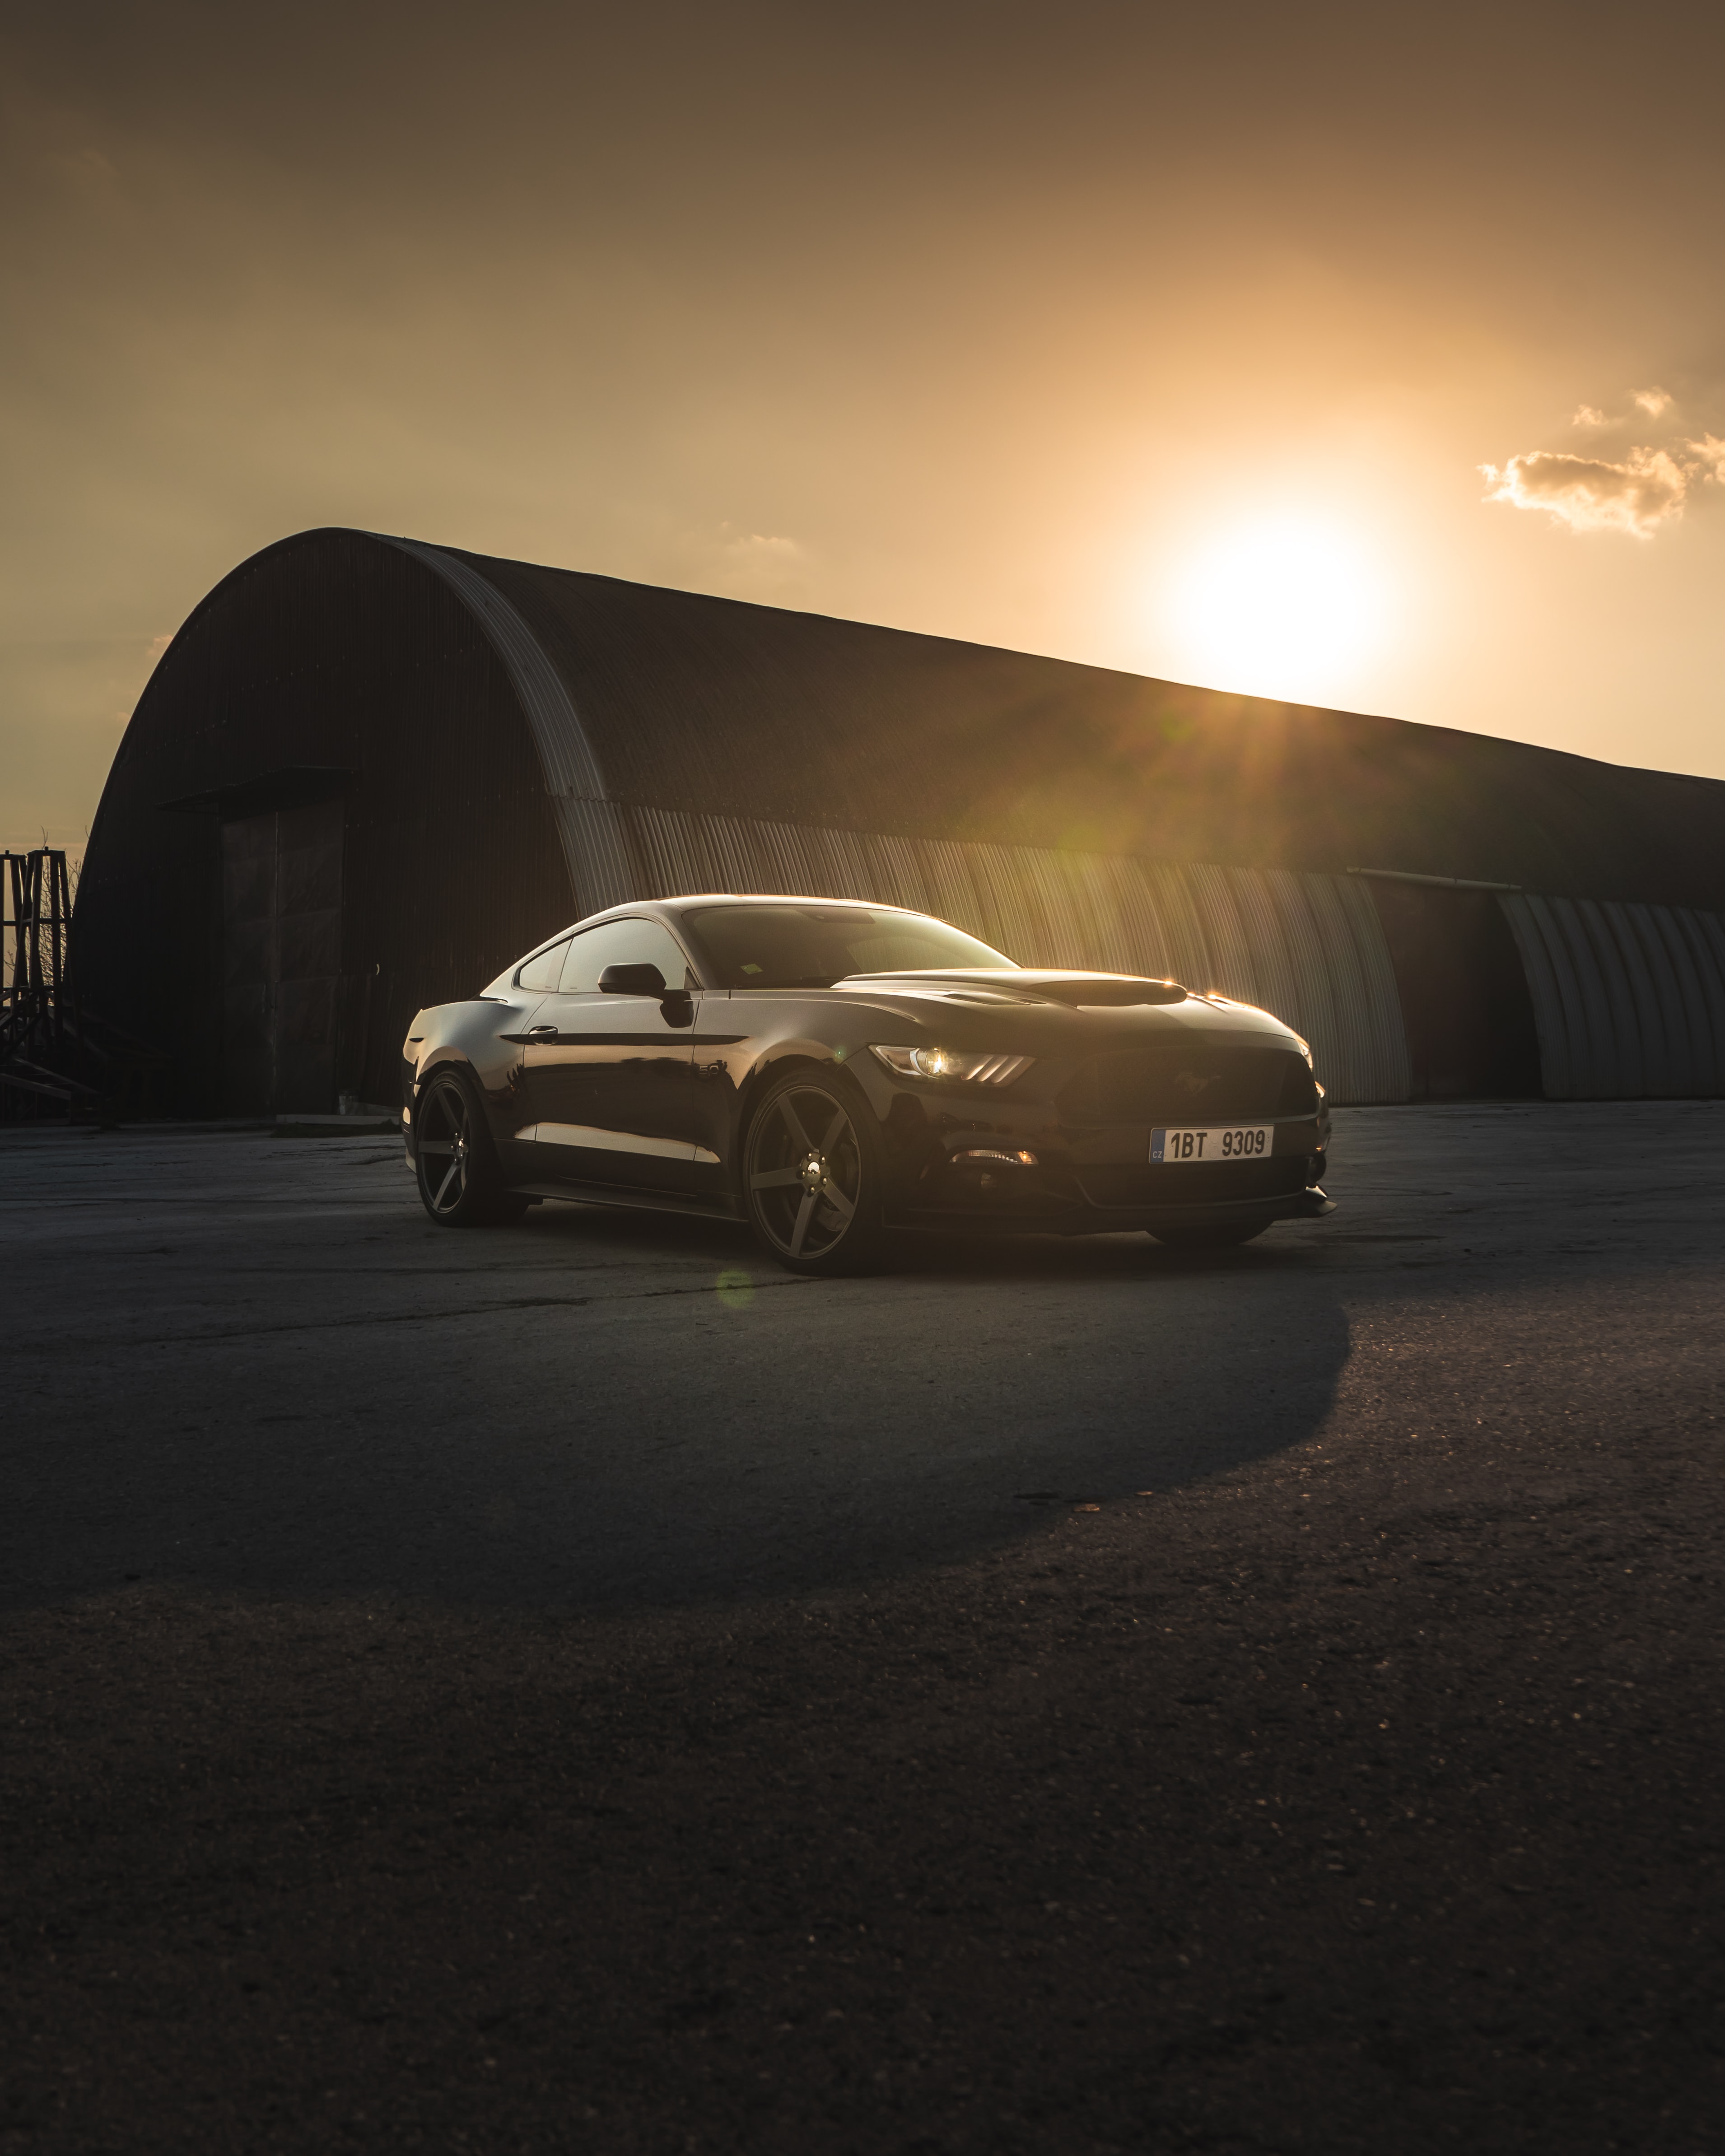 mustang, sports car, ford mustang, cars, black, sports, sunset, car, side view